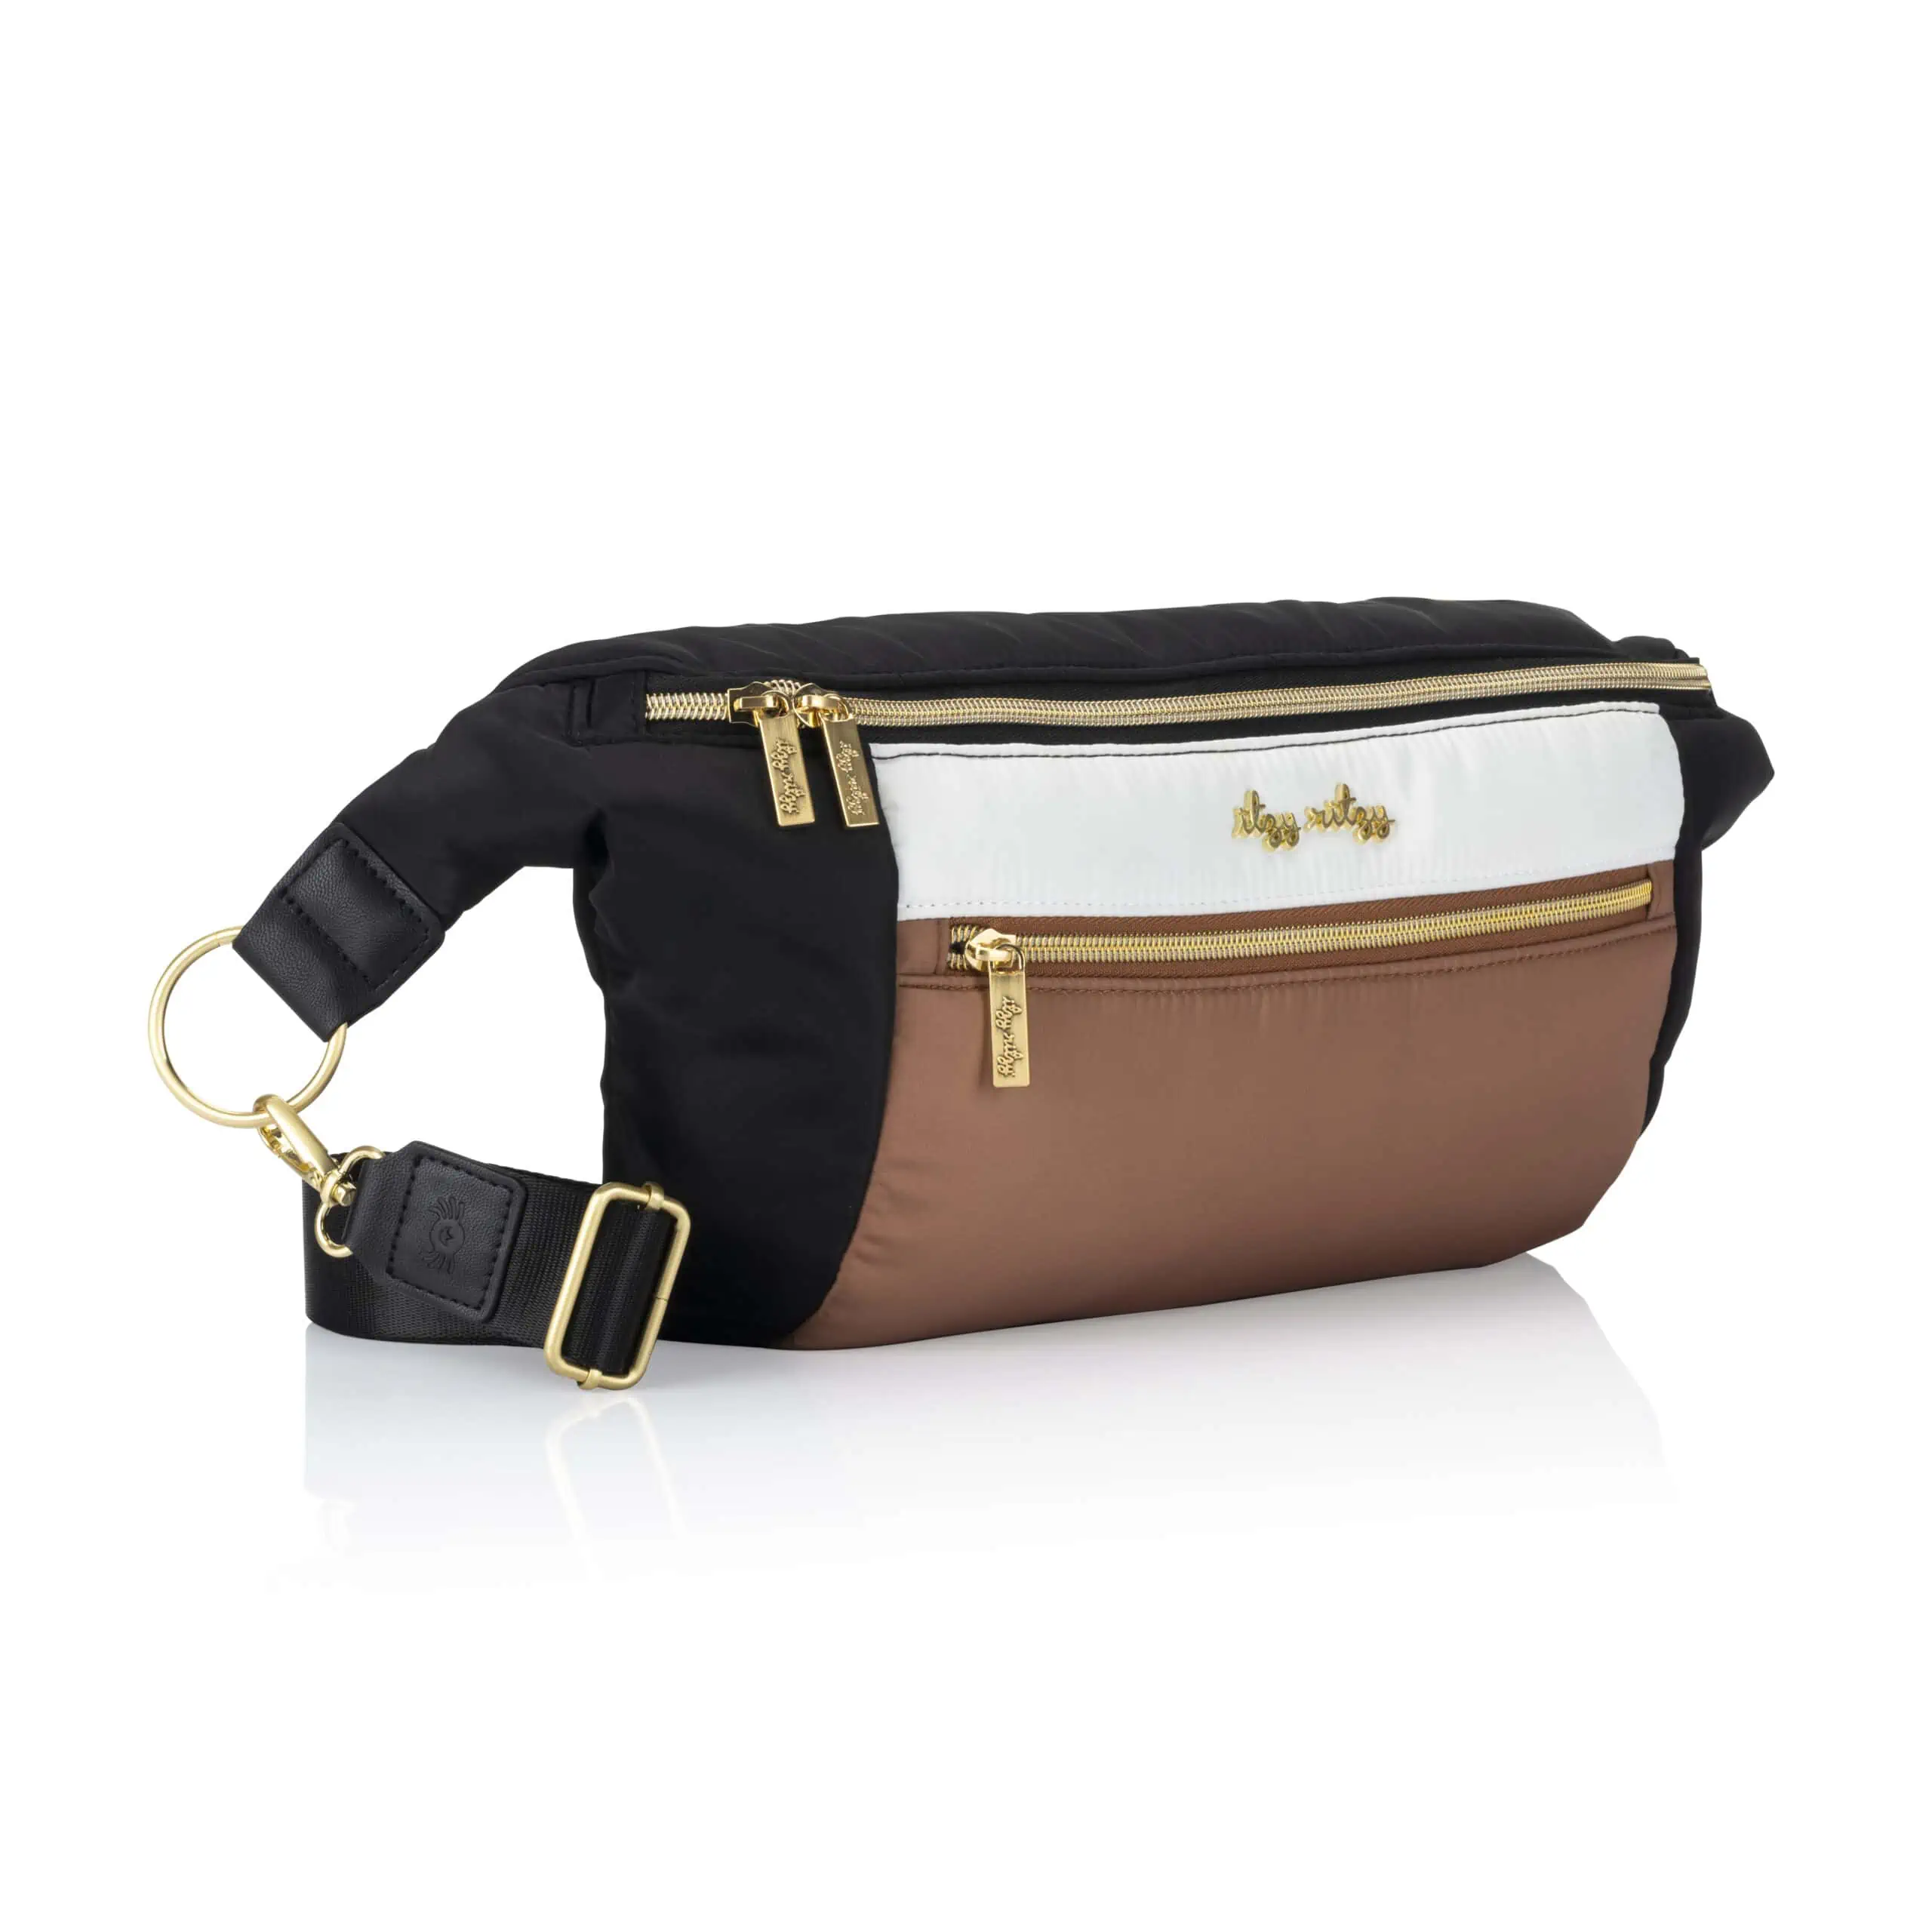 A black and white fanny pack with a gold zipper.